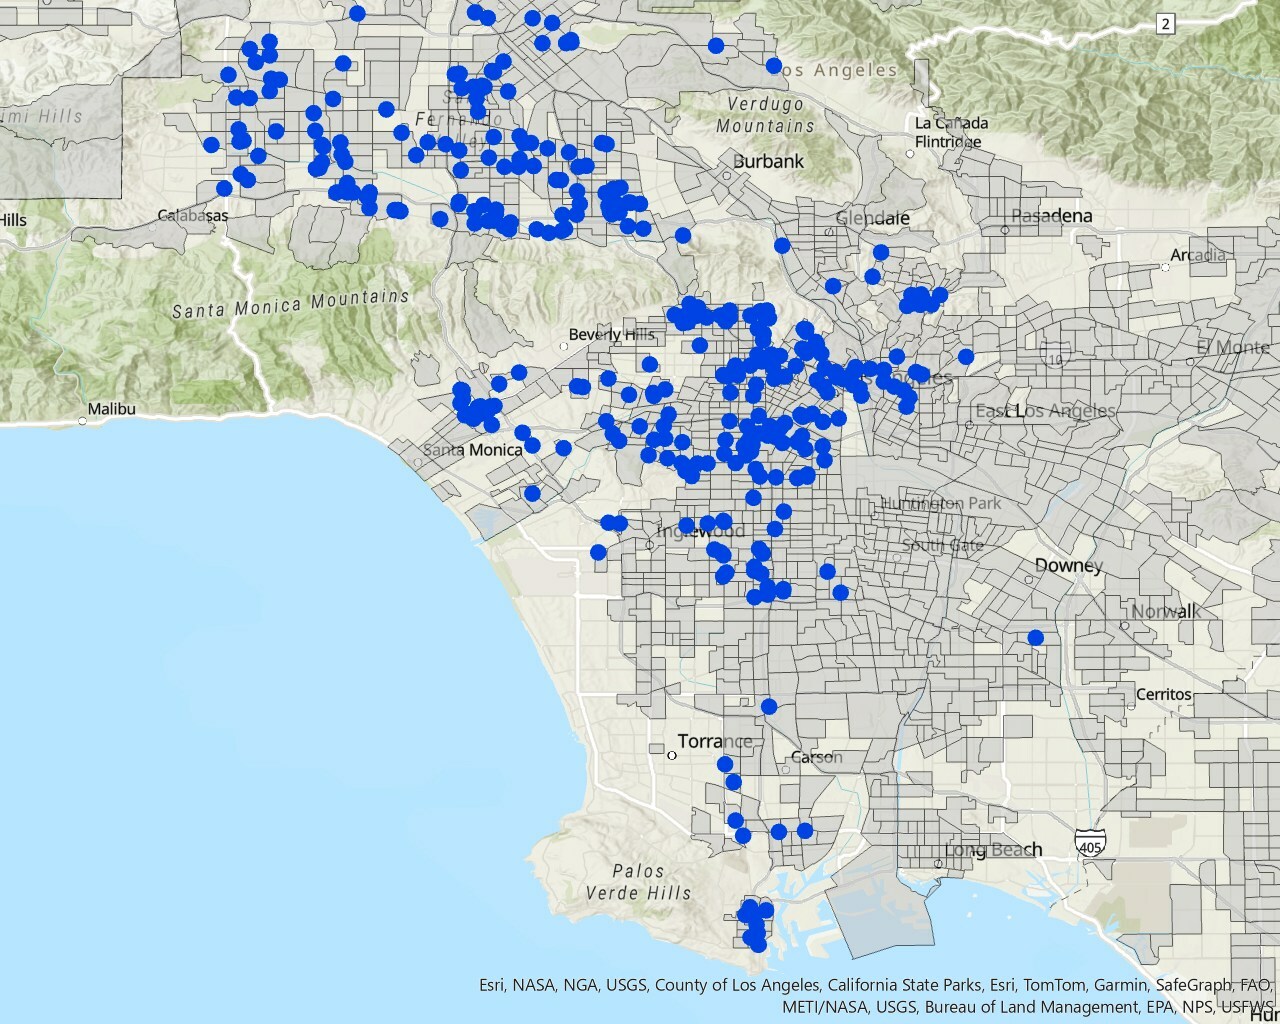 Flo's curbside chargers (blue) located in Justice40 (gray) communities in Los Angeles. Graphic: Flo